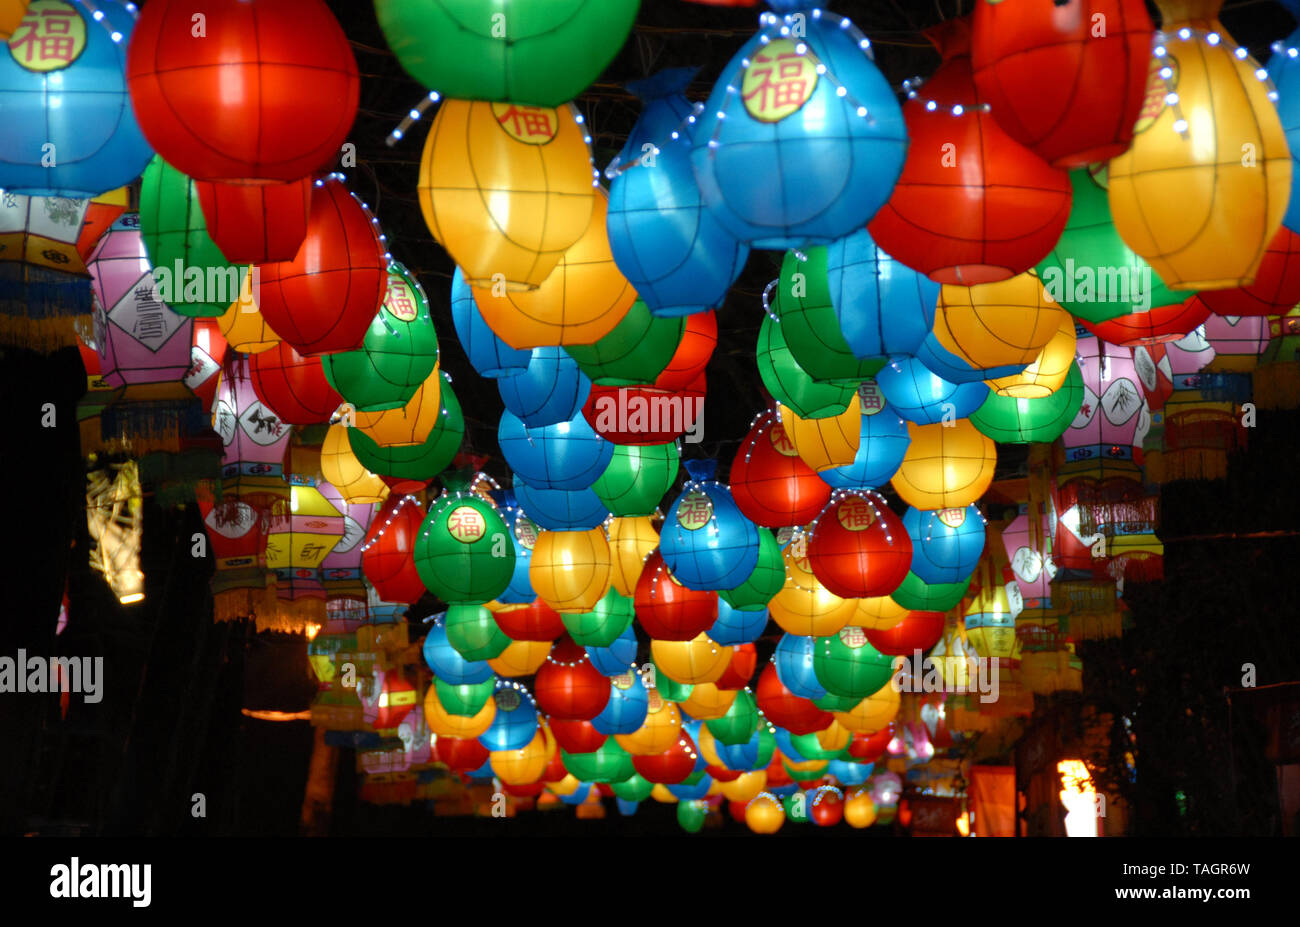 Chinese lanterns in Chengdu at the Wuhou Temple Lantern Festival in Chengdu, China. The red, blue, green and yellow lanterns are for Chinese New Year. Stock Photo